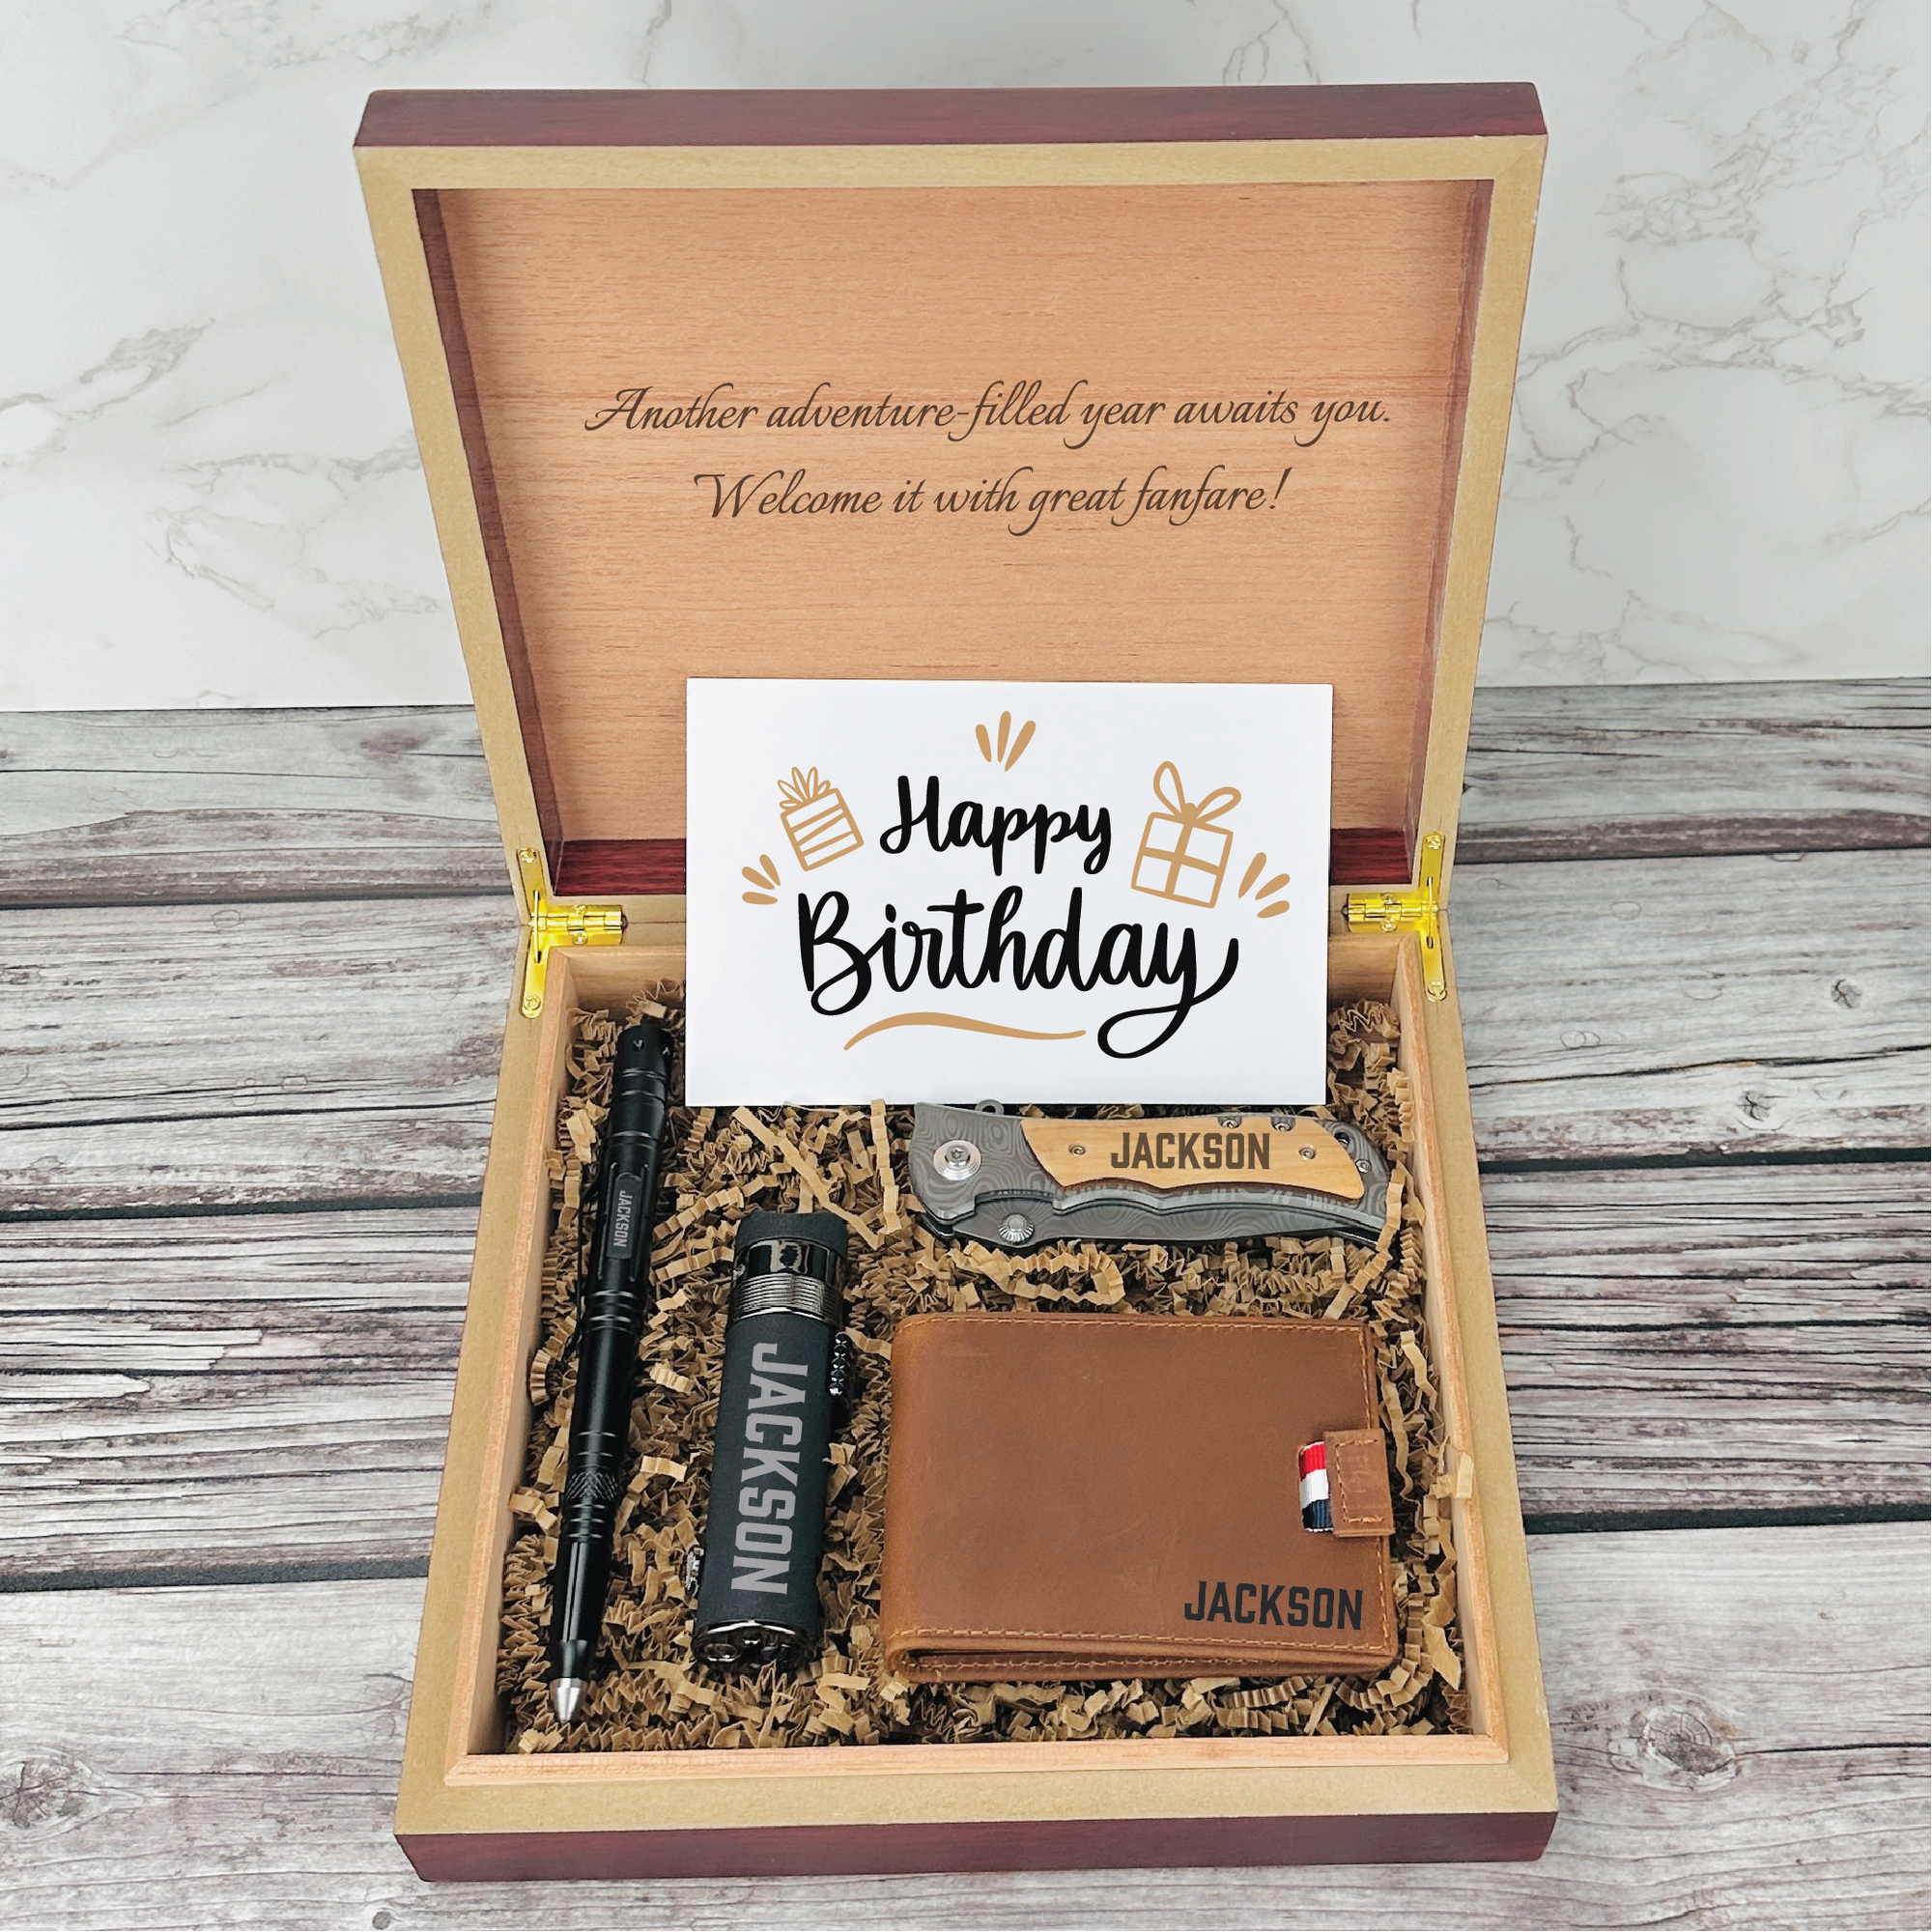 Personalized Birthday Gift Box for Men - Custom Engraved Name and